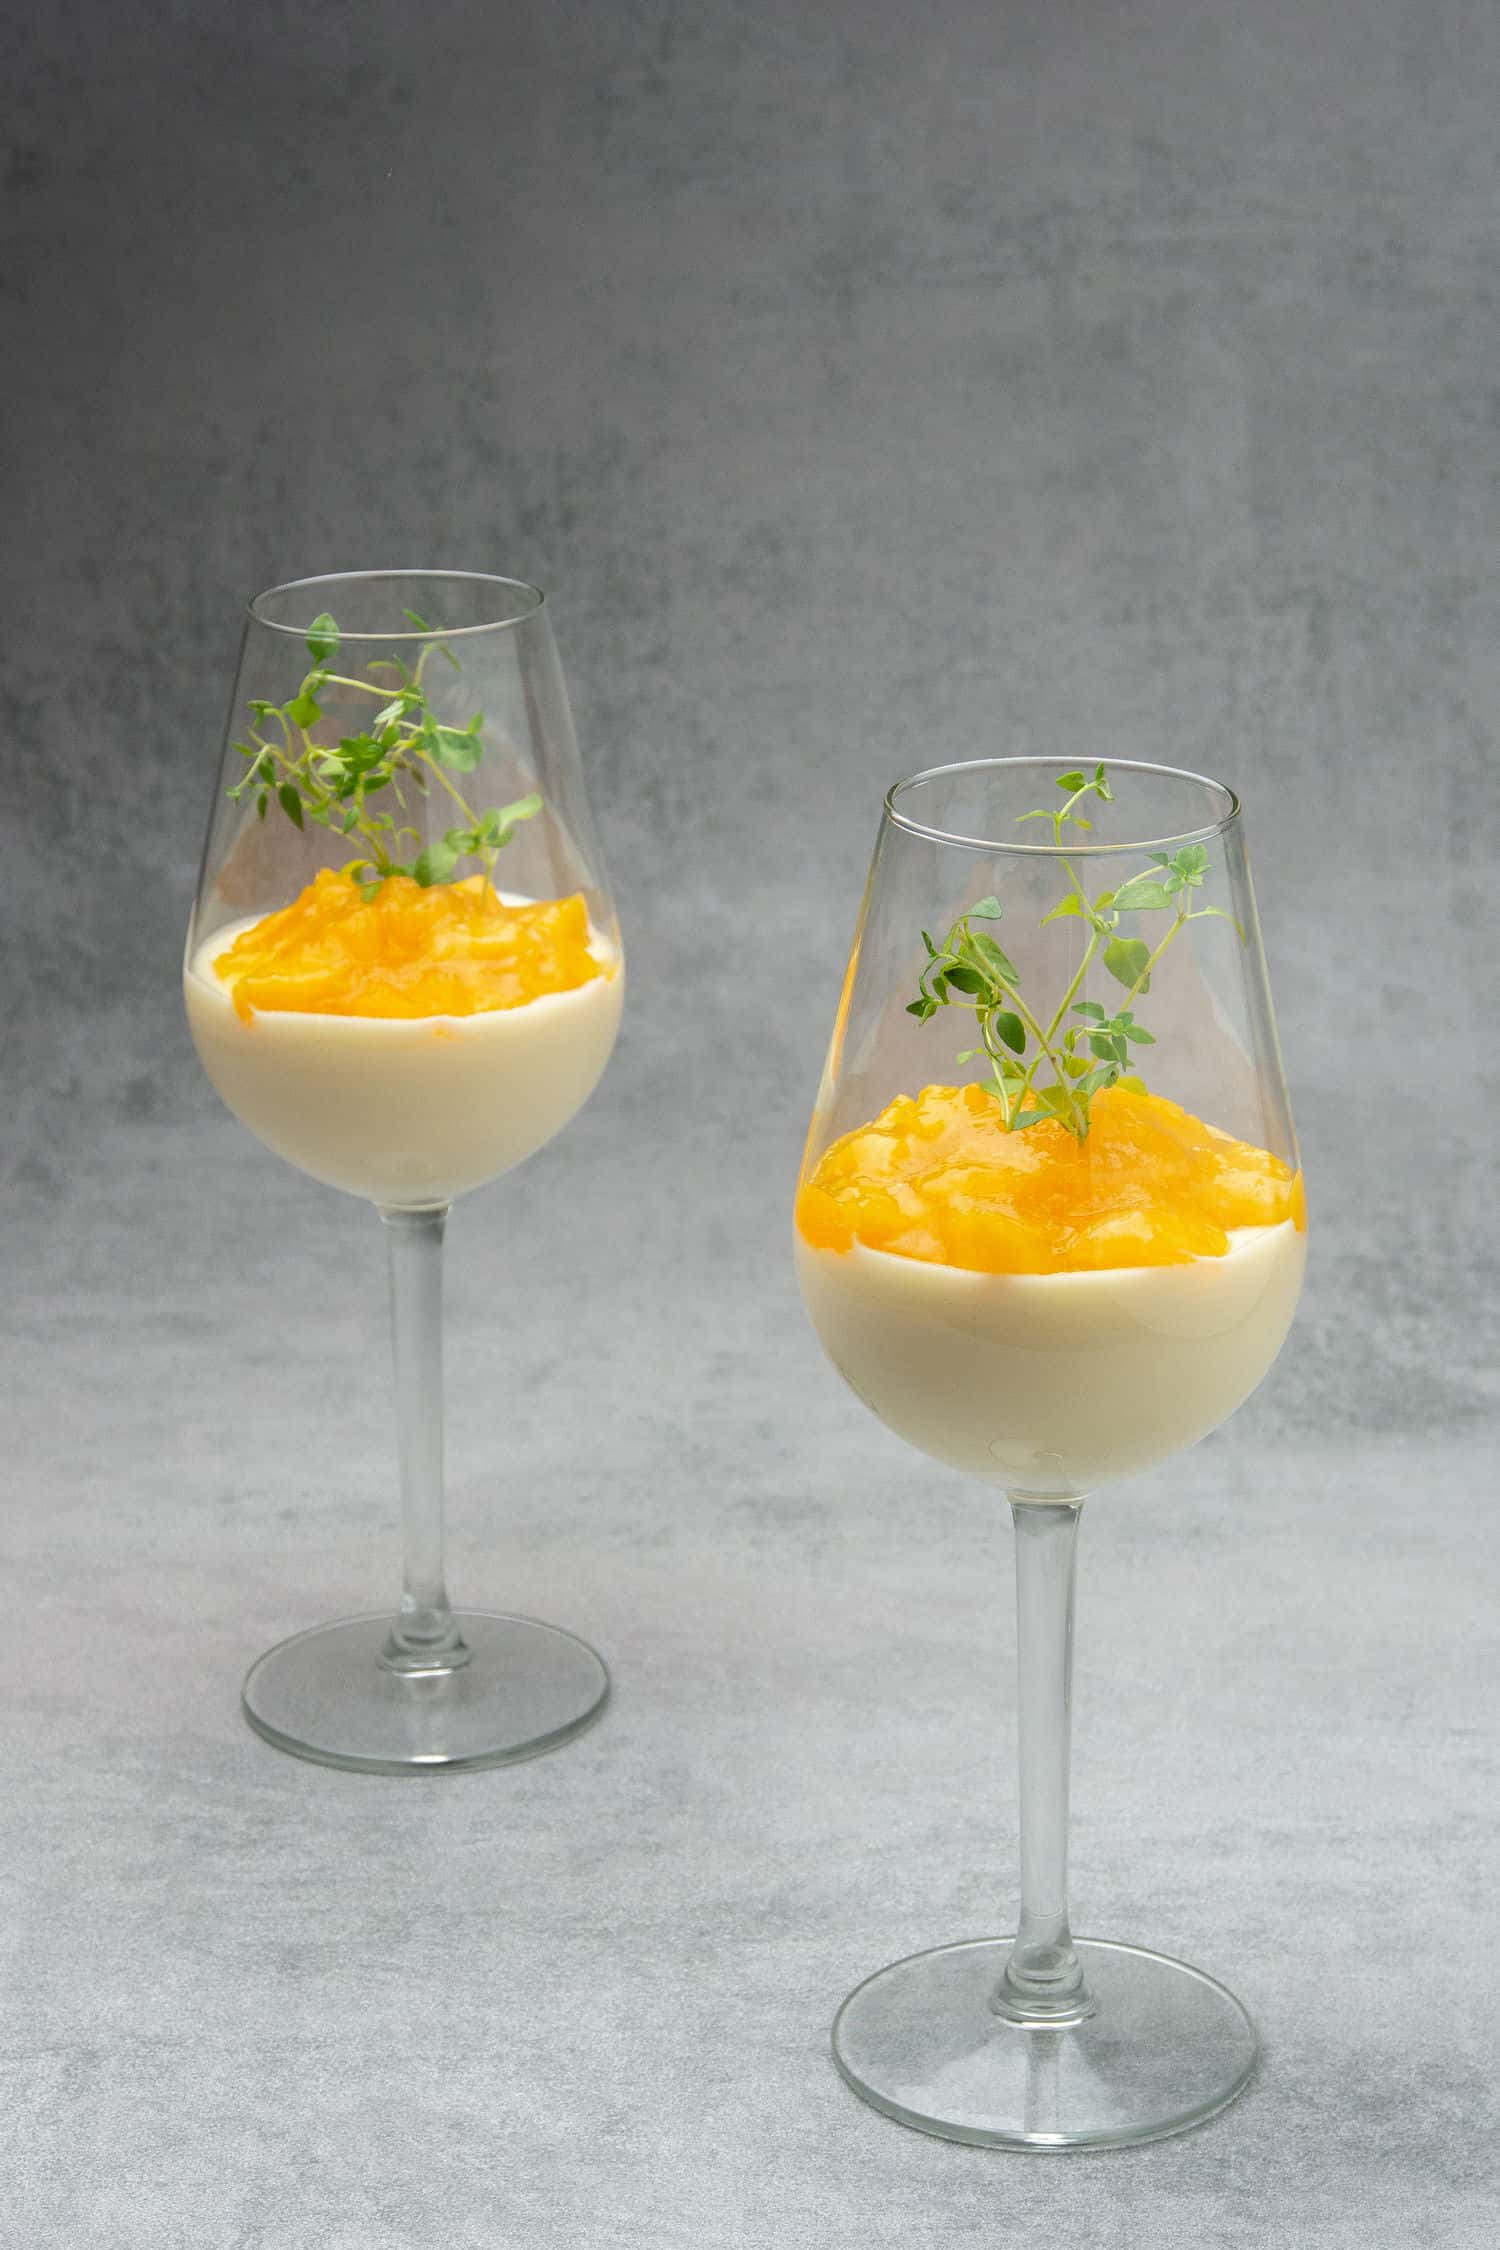 Two glasses of Wine mousse Parfait with peach with a gray background.